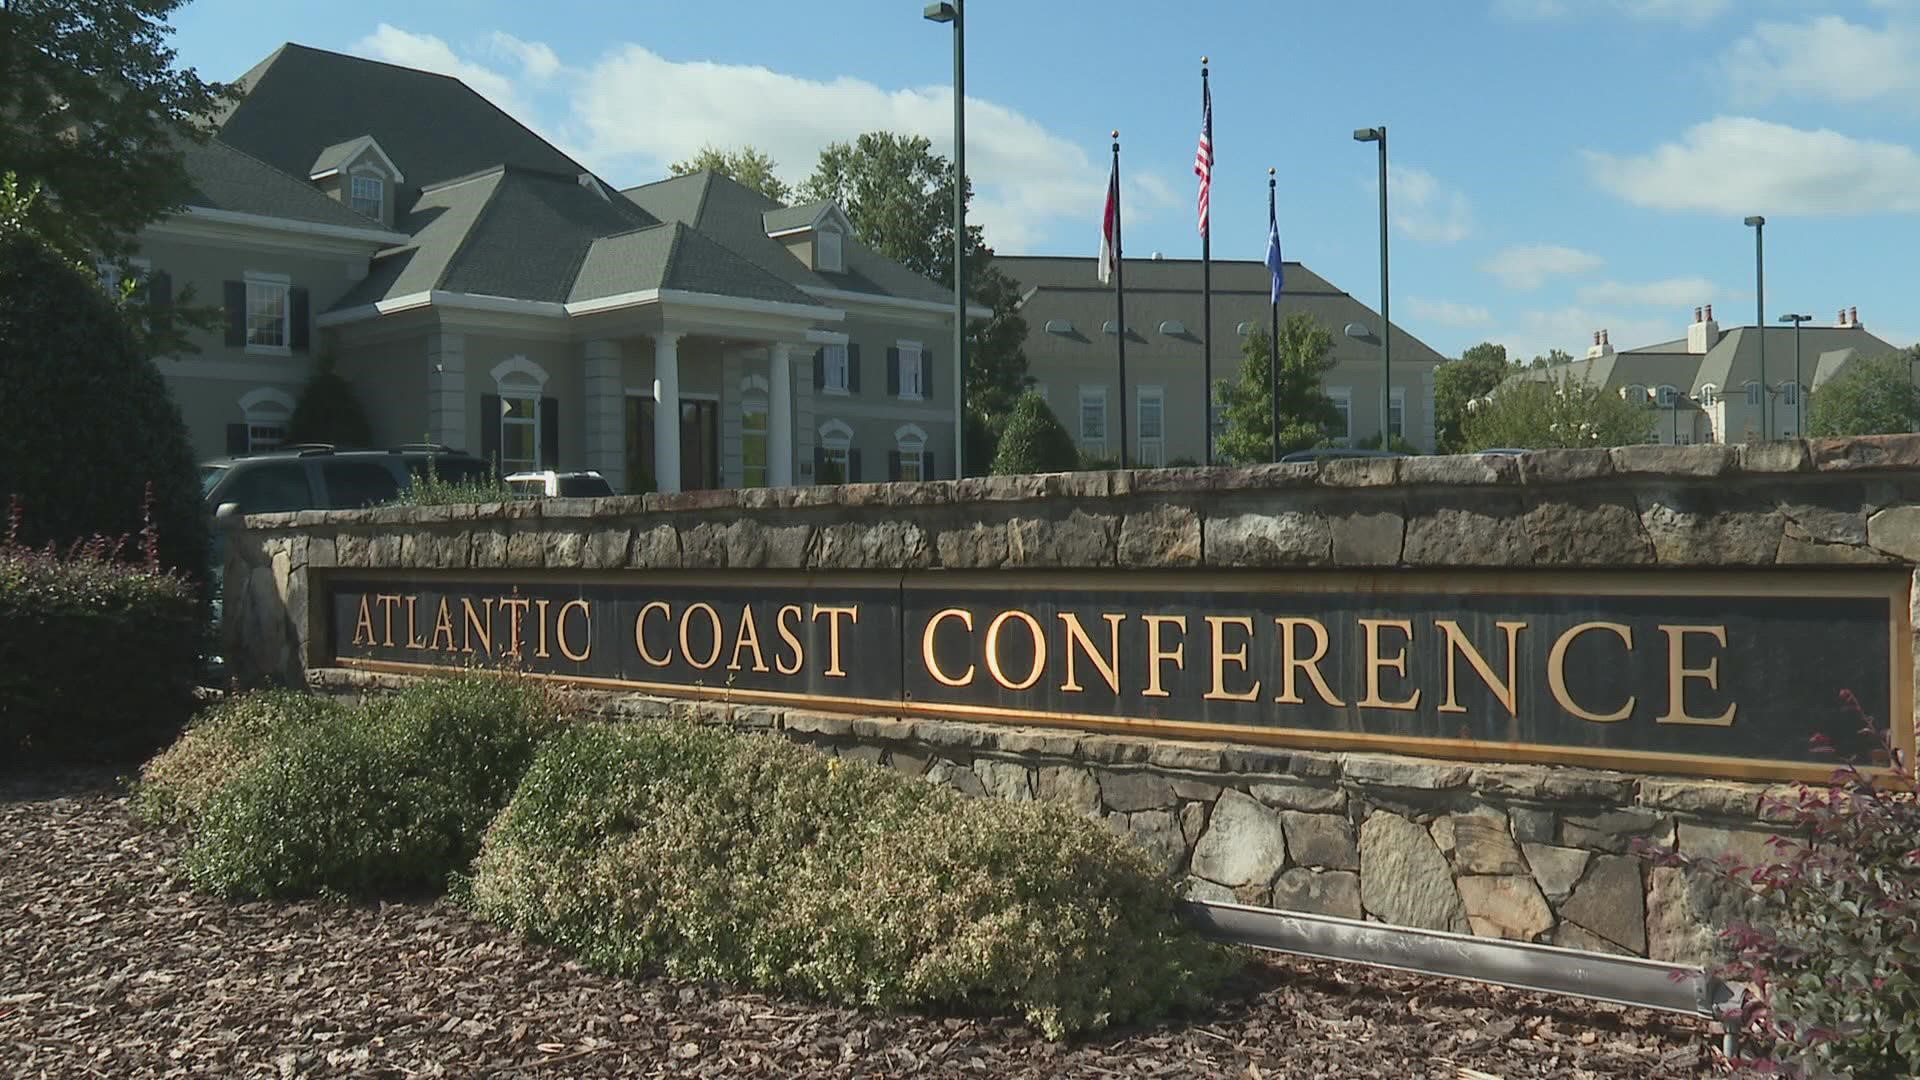 Greensboro has been the home of the Atlantic Coast Conference headquarters for 70 years but now that’s coming to an end.